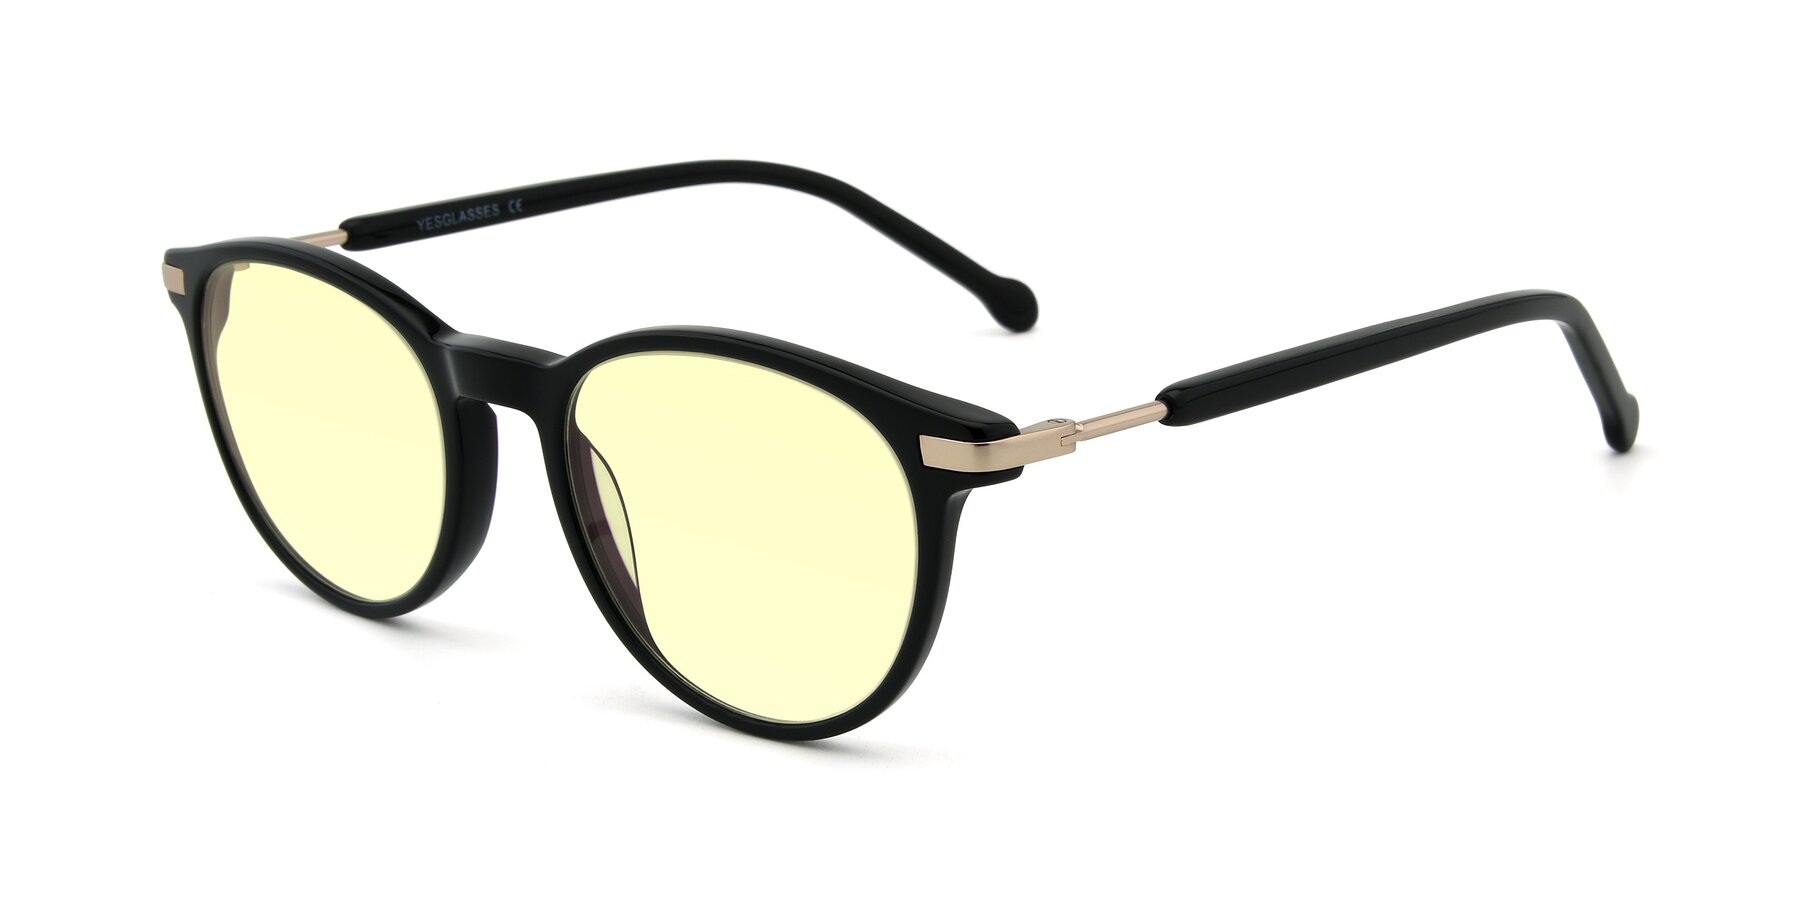 Angle of 17429 in Black with Light Yellow Tinted Lenses